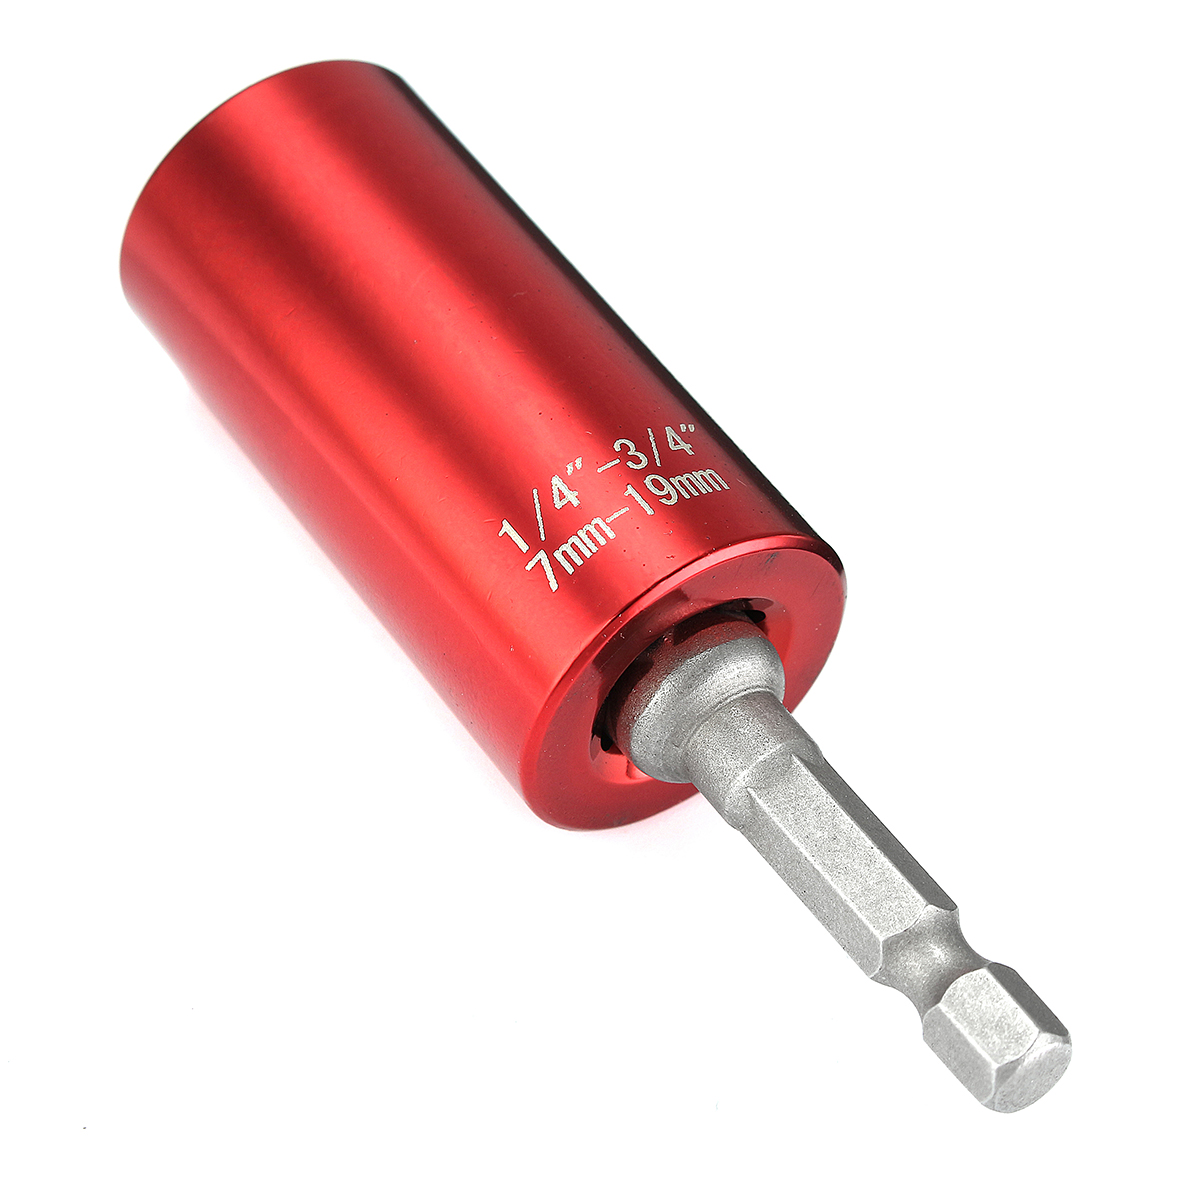 Find 7 19MM Universal Socket Adapter Wrench Sleeve with Power Drill Adapter Tool for Sale on Gipsybee.com with cryptocurrencies